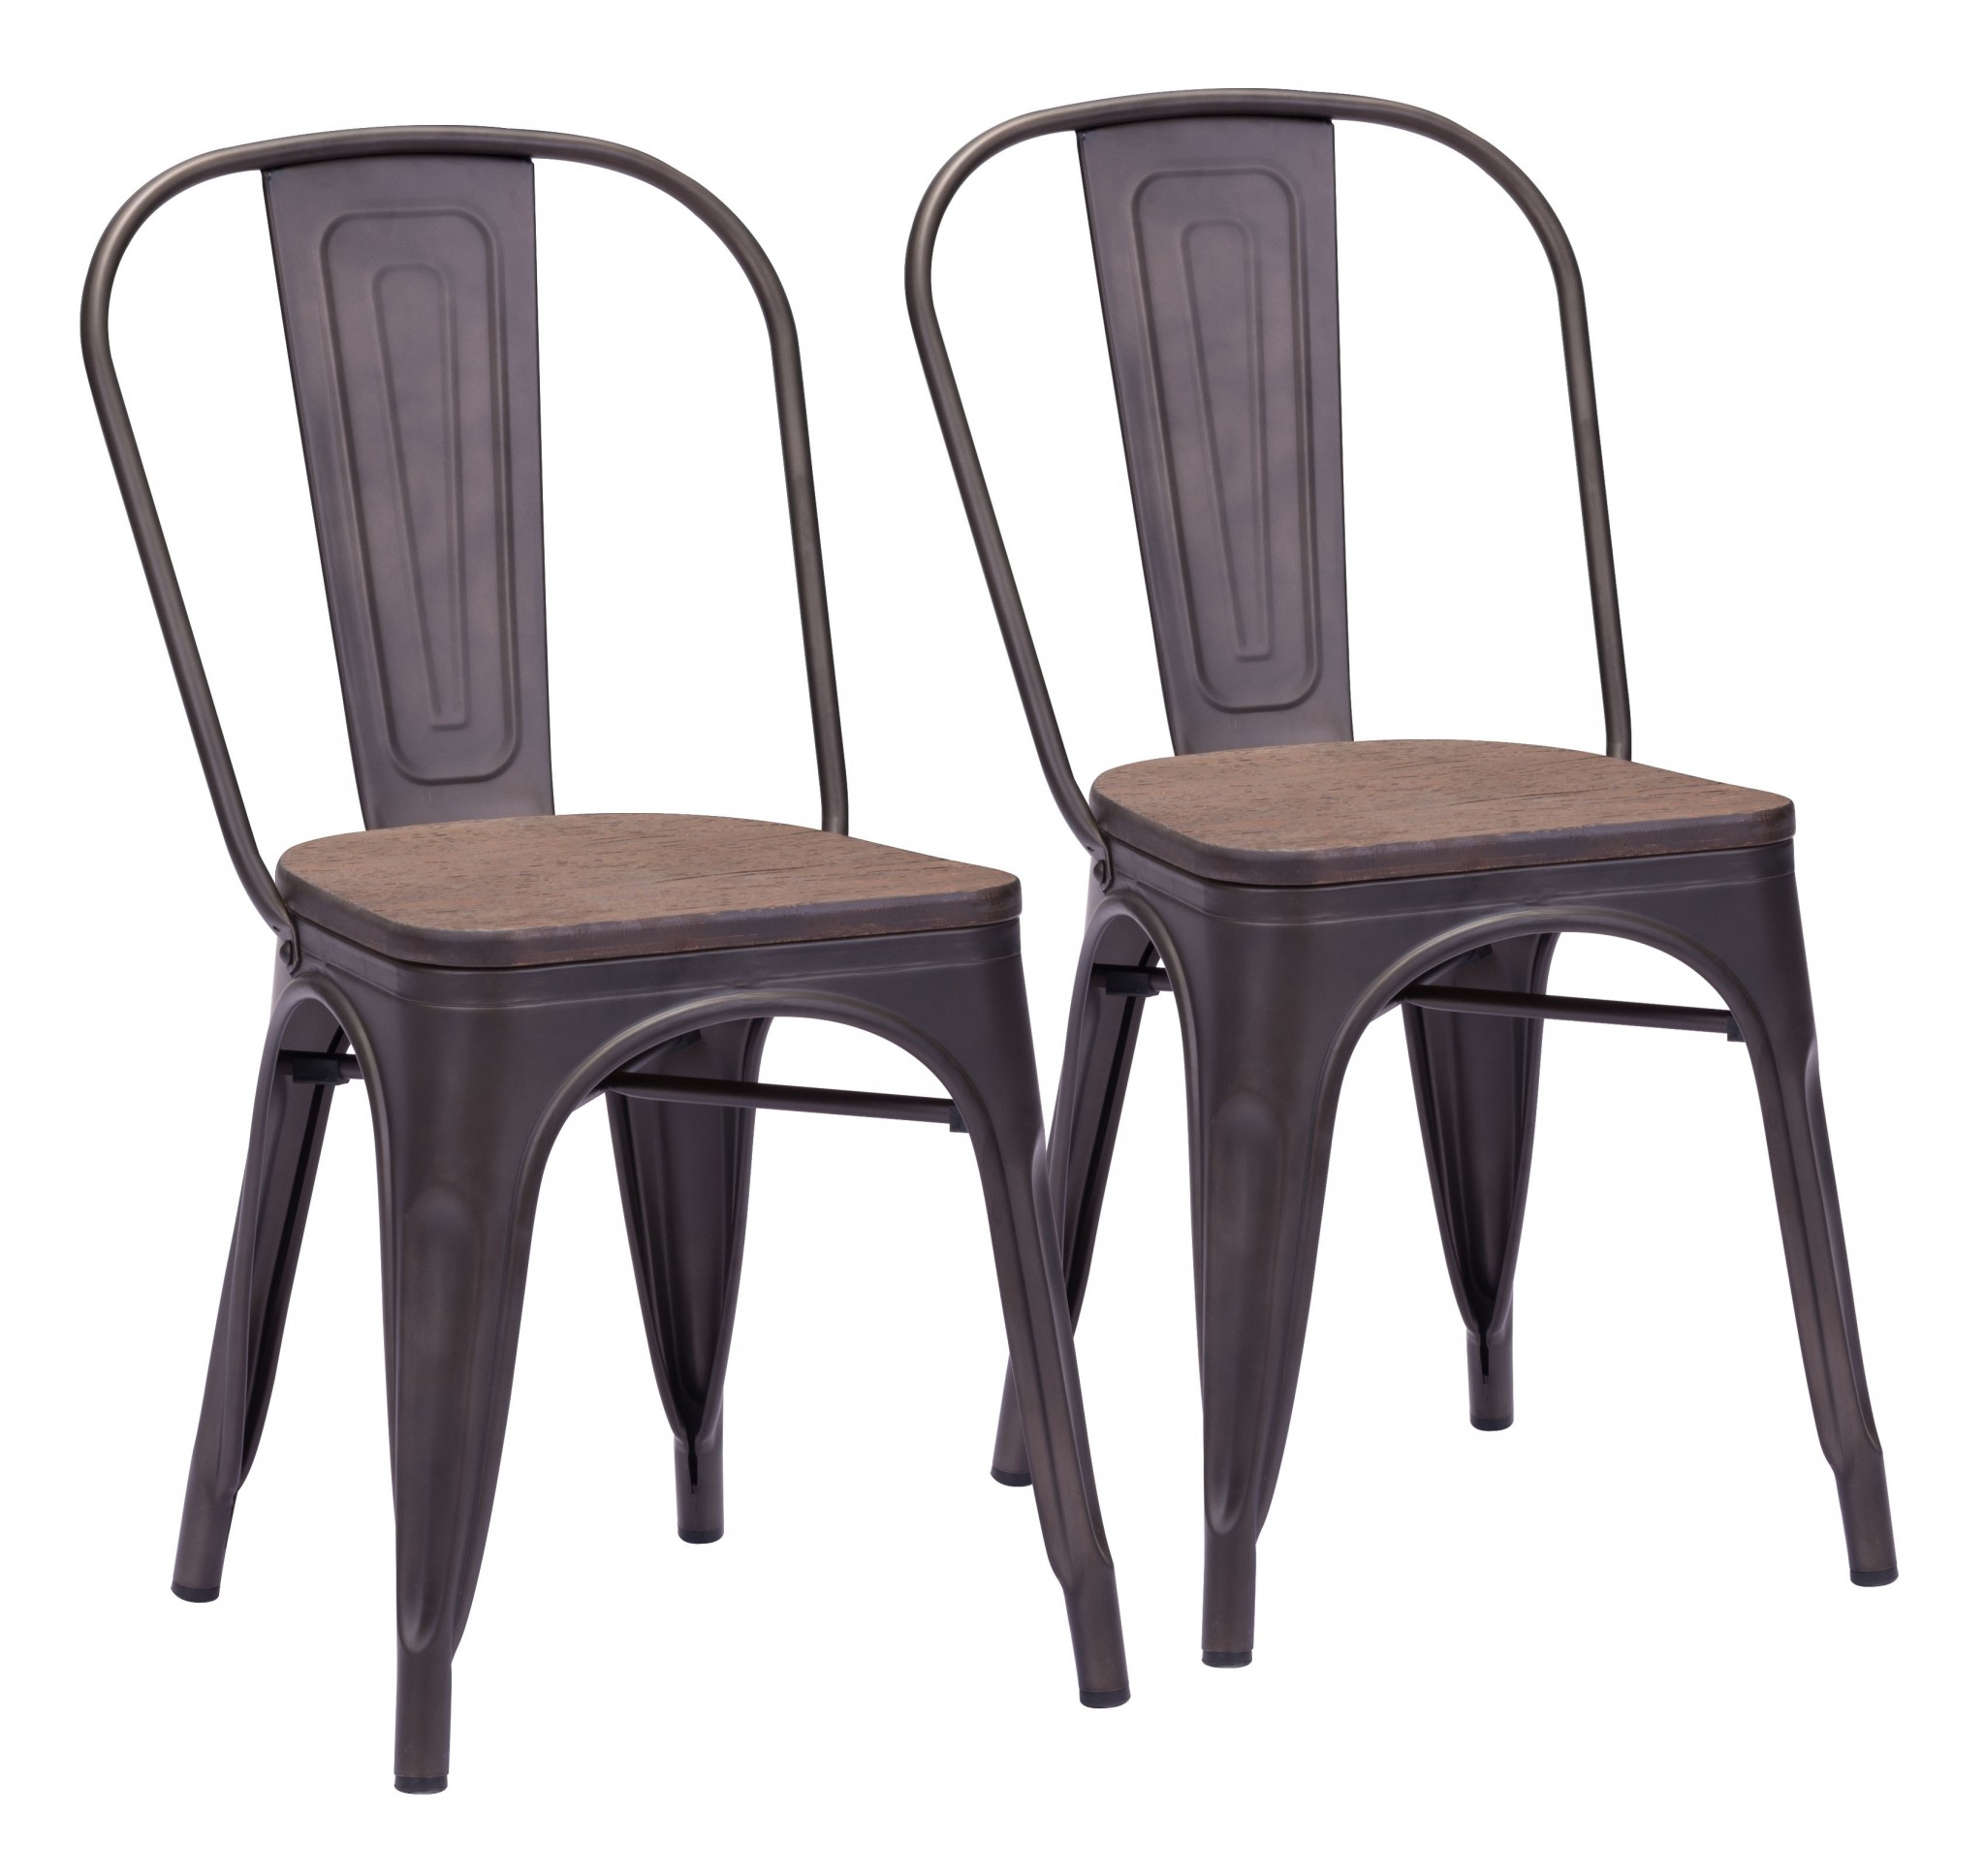 Set of Two Rustic Bistro Black and Brown Dining Chairs